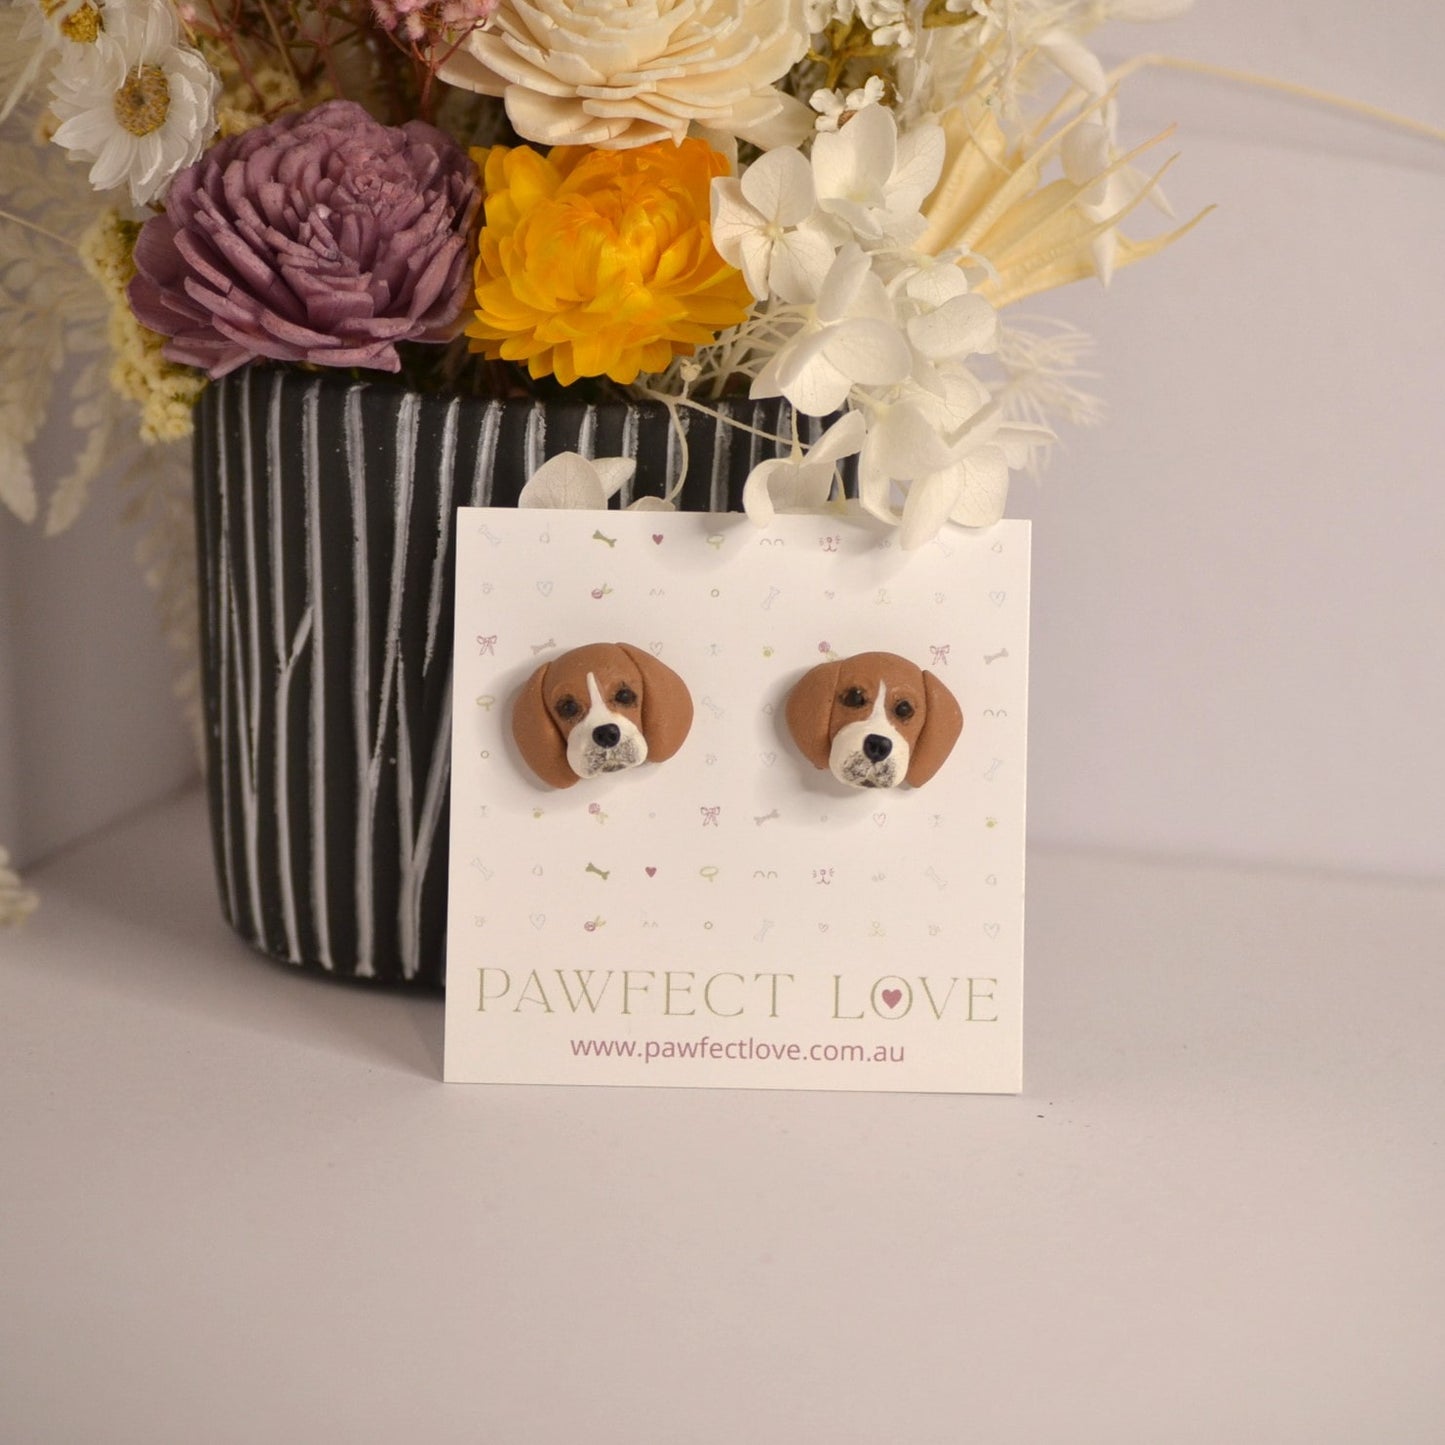 Handmade beagle stud earrings by Pawfect Love, positioned in front of dried flower arrangement